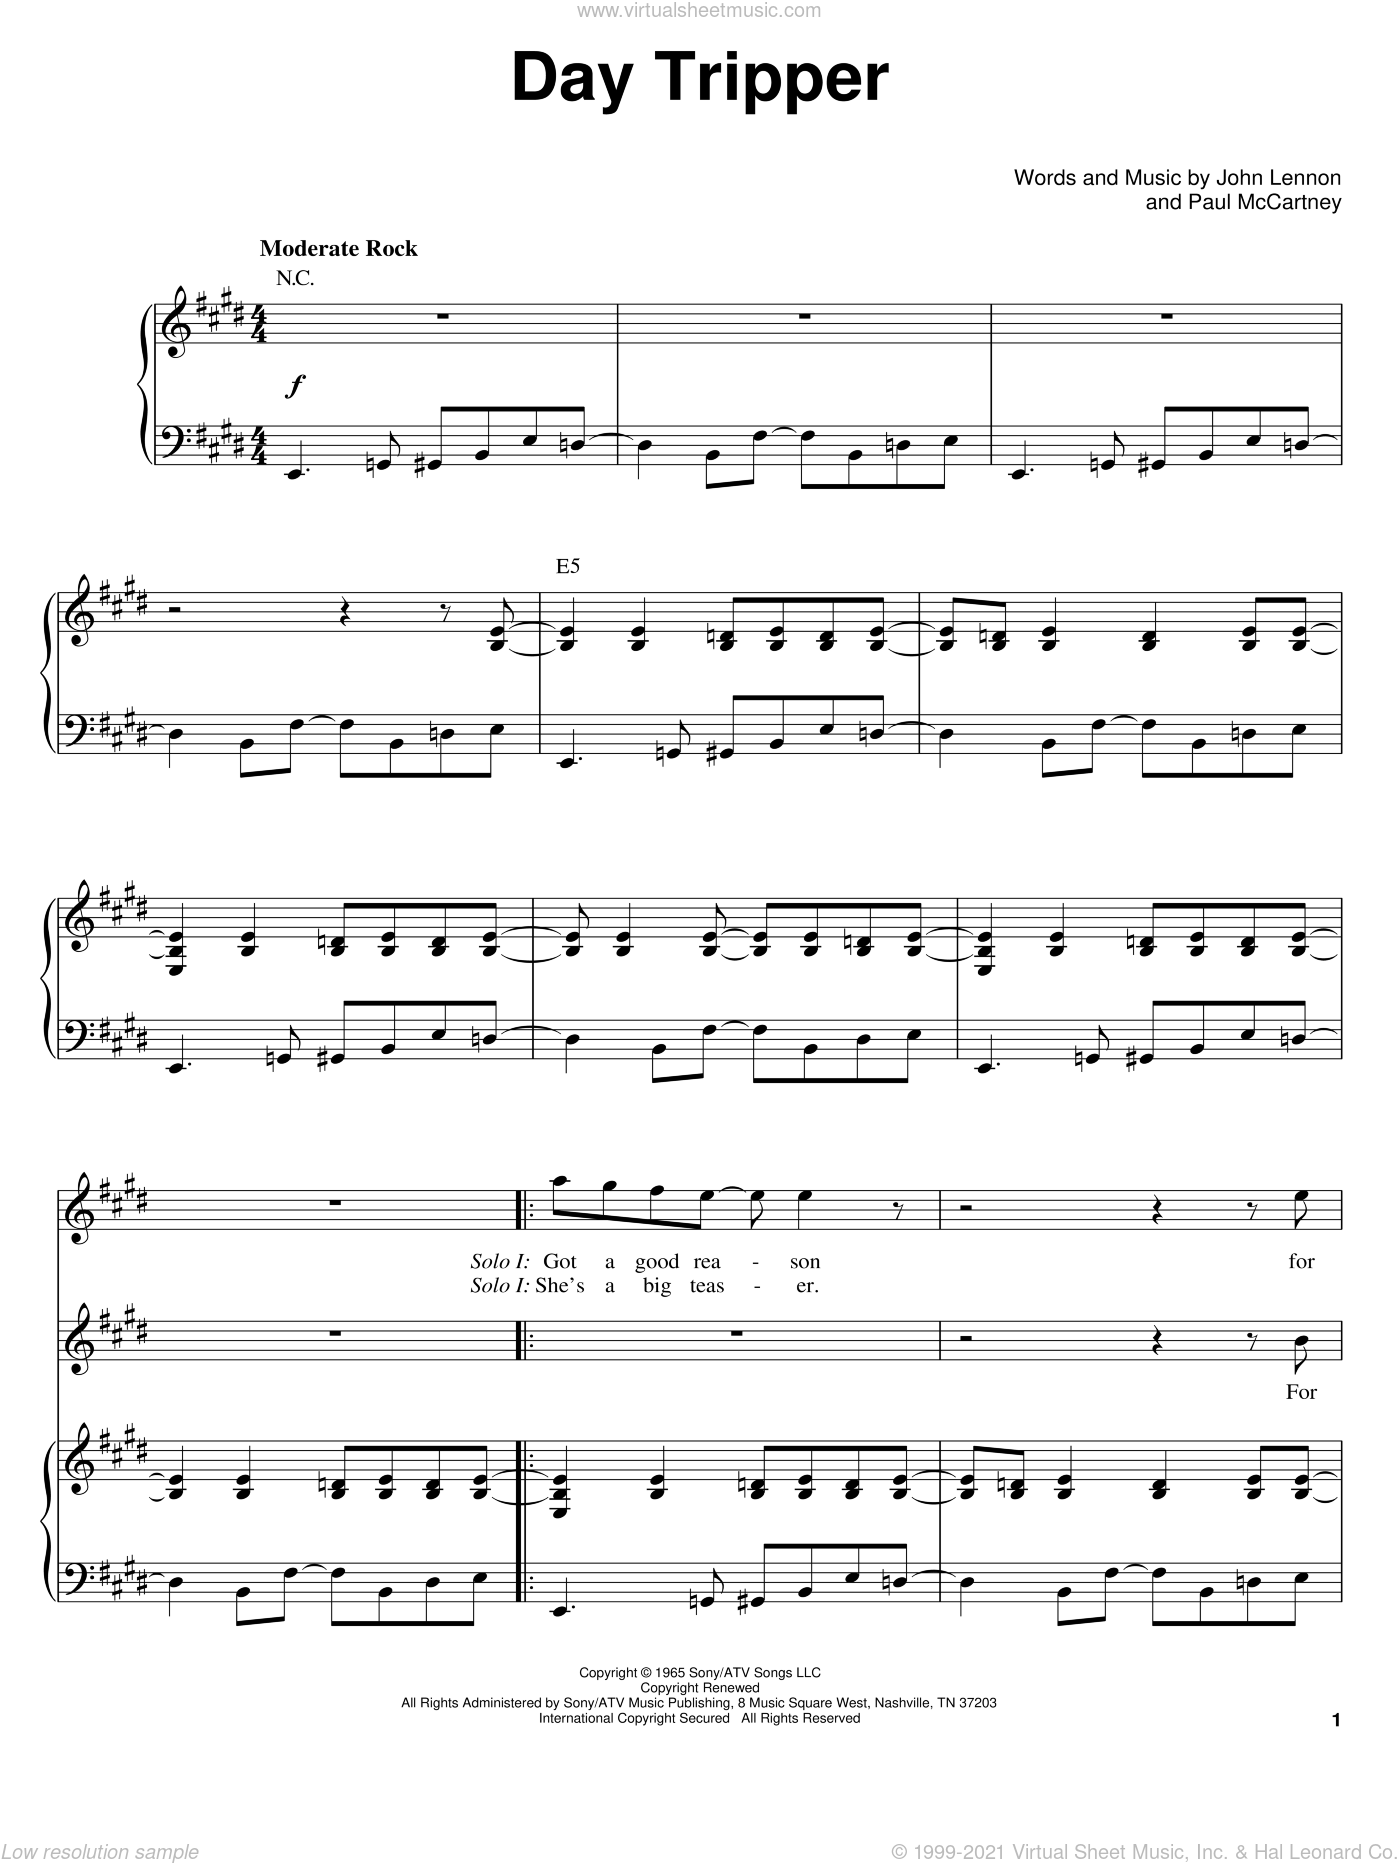 Beatles - Day Tripper sheet music for voice and piano [PDF]